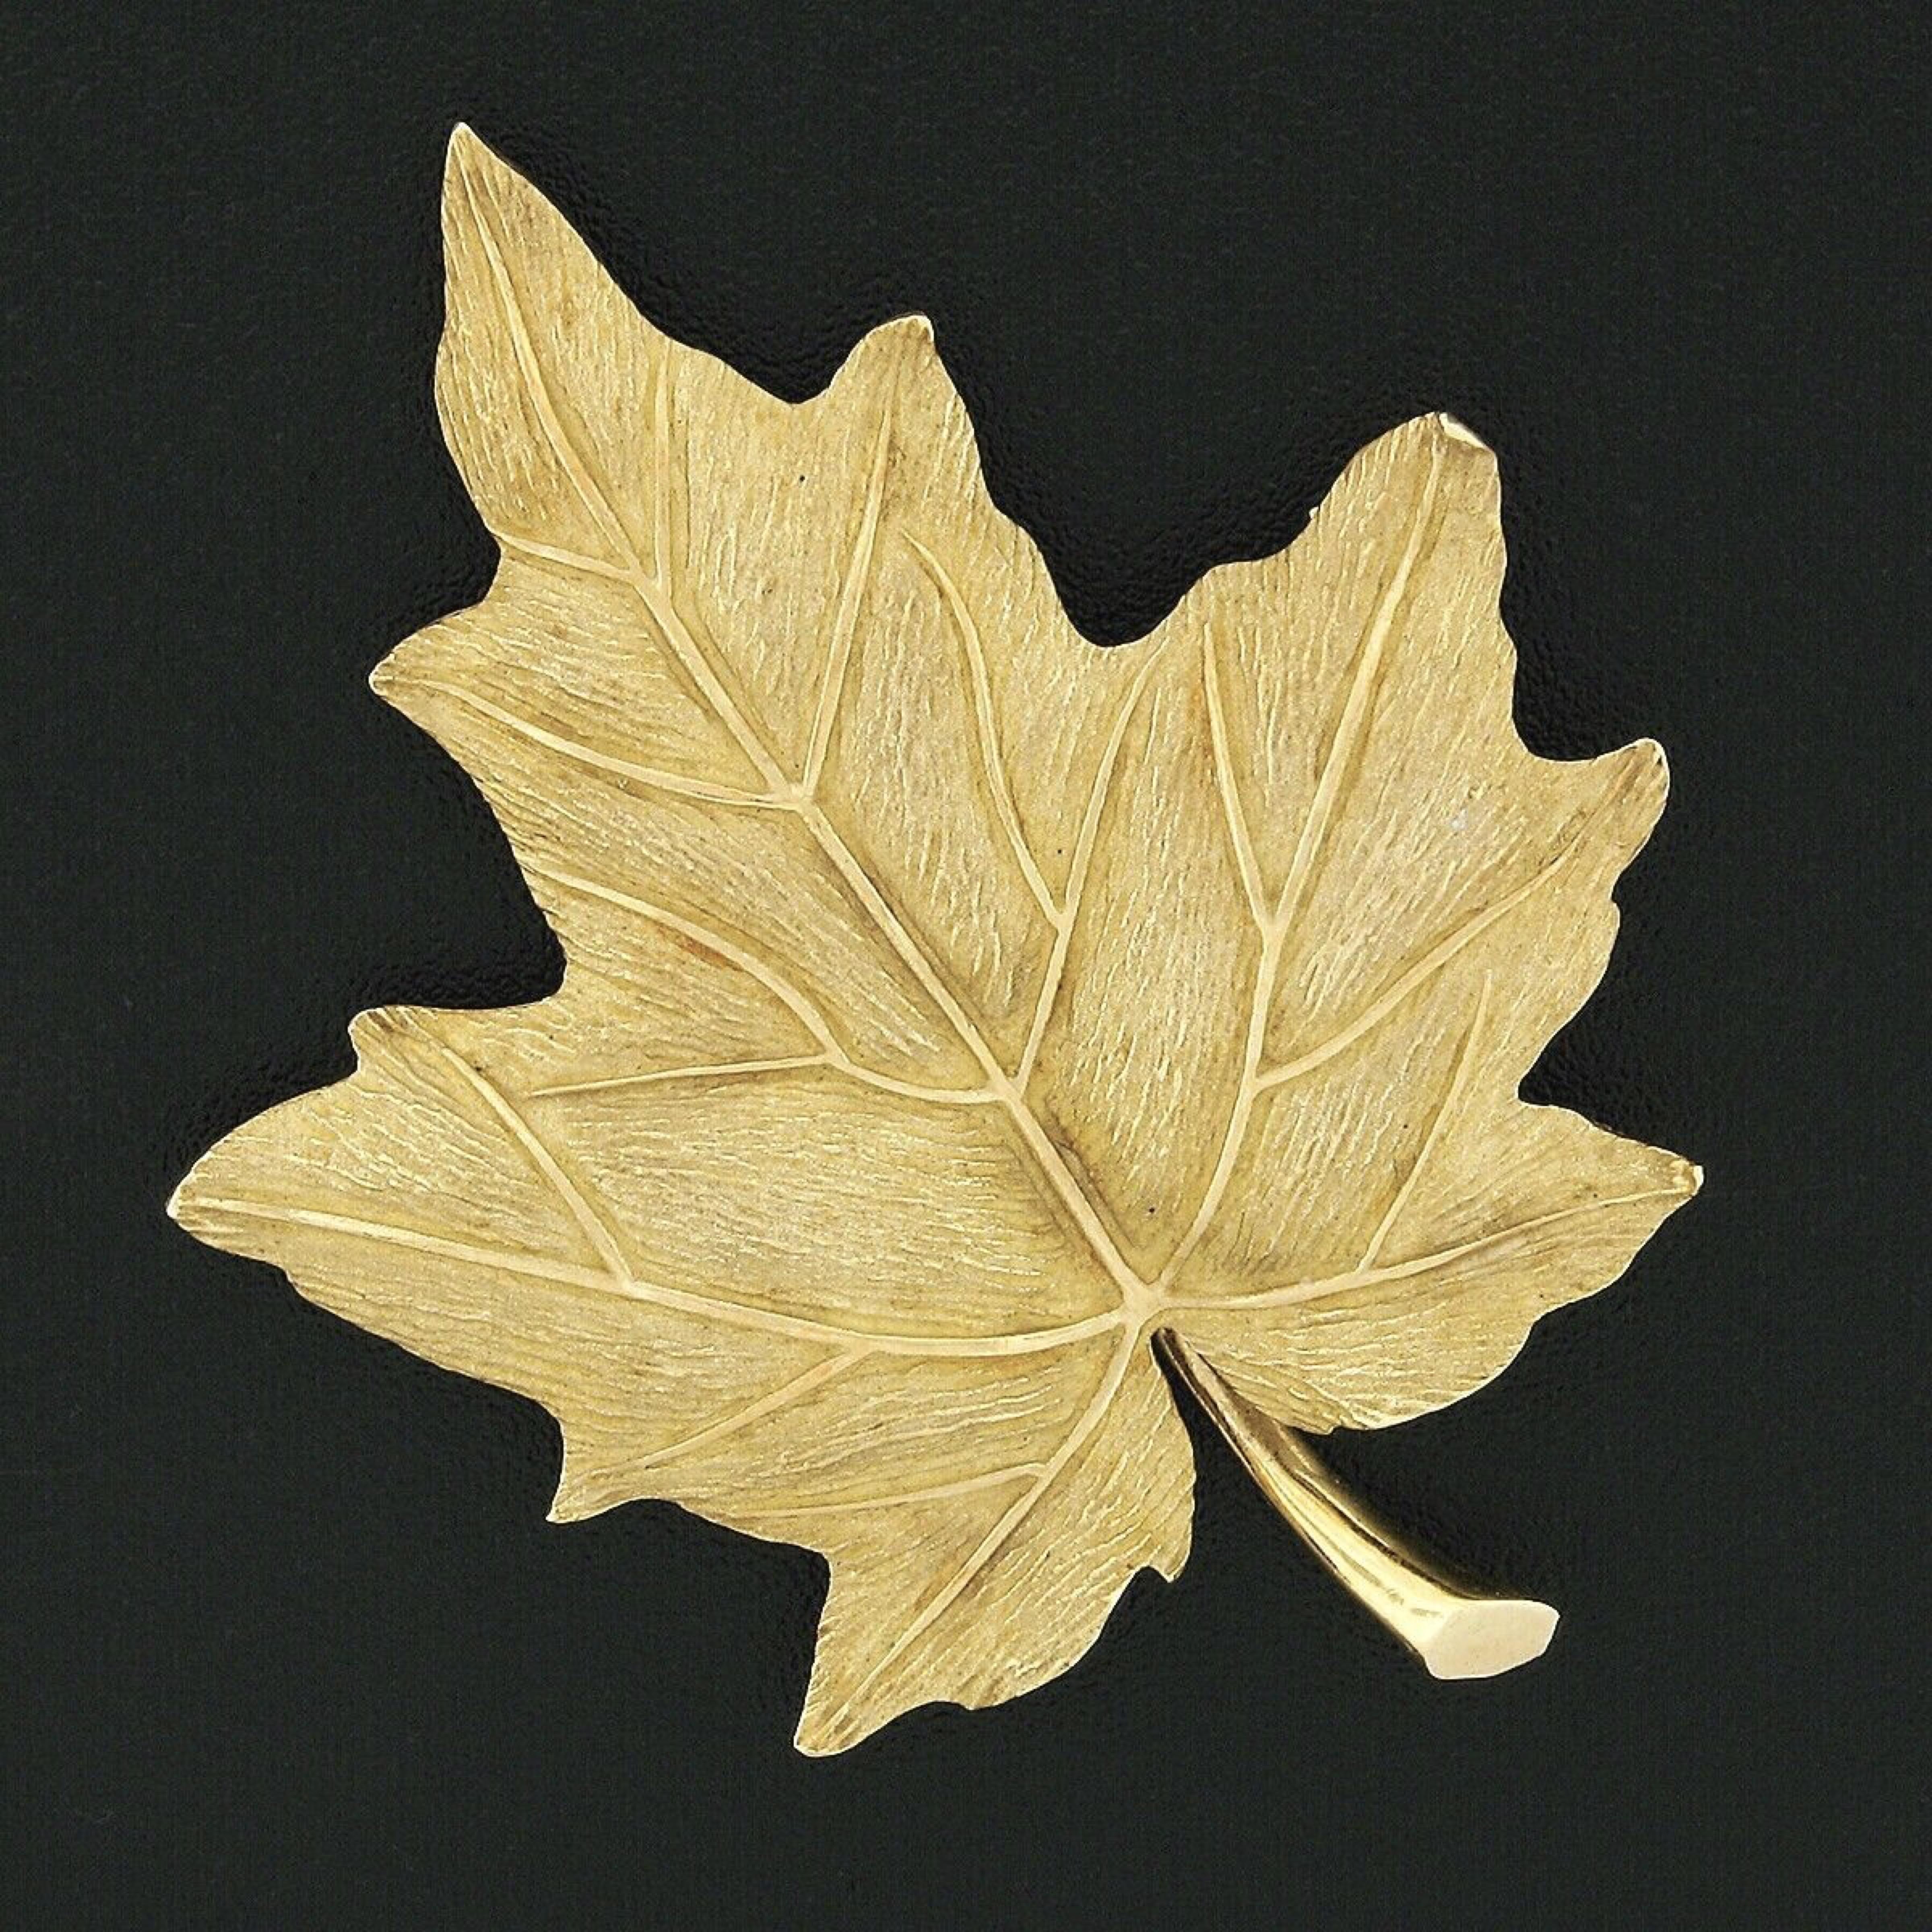 Here we have an amazing vintage brooch, 100% guaranteed authentic Tiffany & Co., crafted from solid 18k yellow gold. The brooch features a very detailed maple leaf showing incredible hand etching work, giving this piece its realistic appearance and